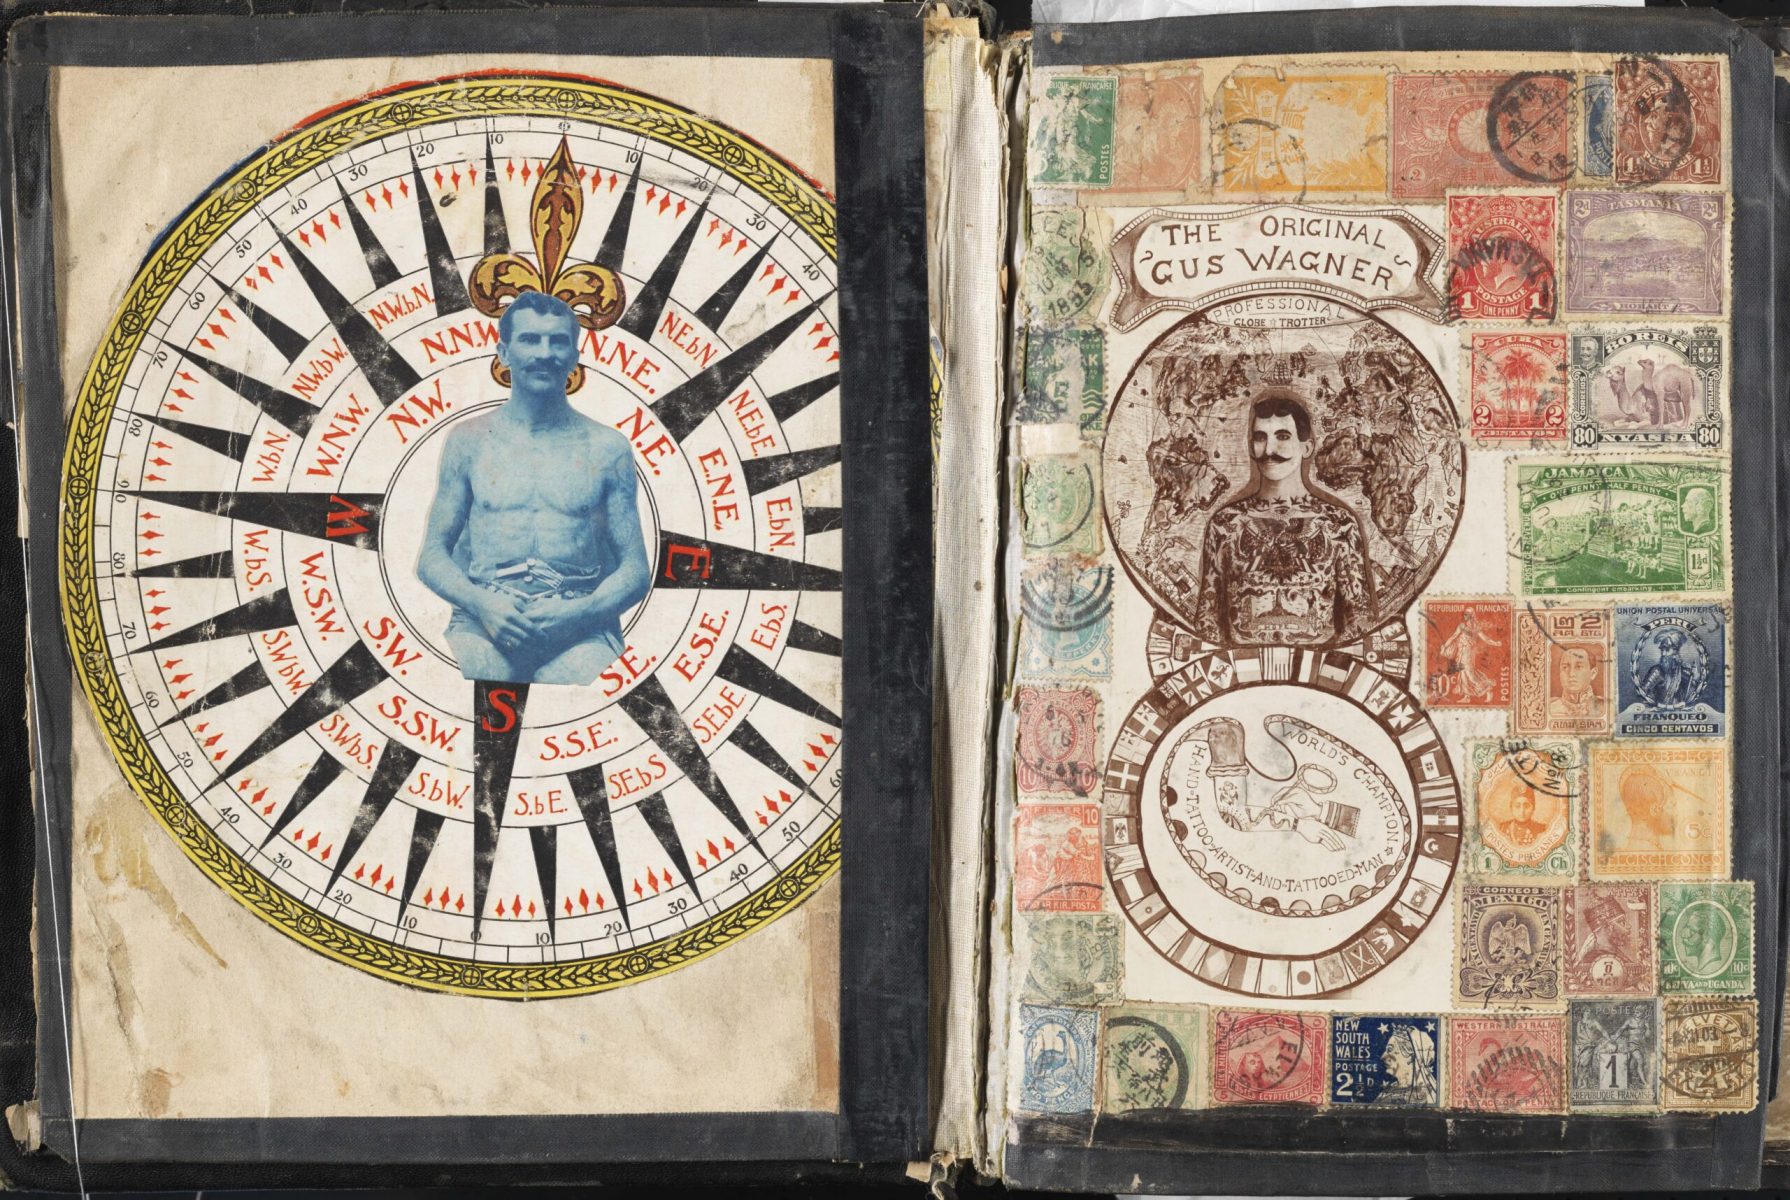 Page spread from “Souvenirs of the Travels and Experiences of the Original Gus. Wagner Globe Trotter & Tattoo Artist” scrapbook by Augustus “Gus” Wagner (American 1872-1941), ca.1897-1941. The Alan Govenar and Kaleta Doolin Tattoo Collection, South Street Seaport Museum, 2001.039.0023